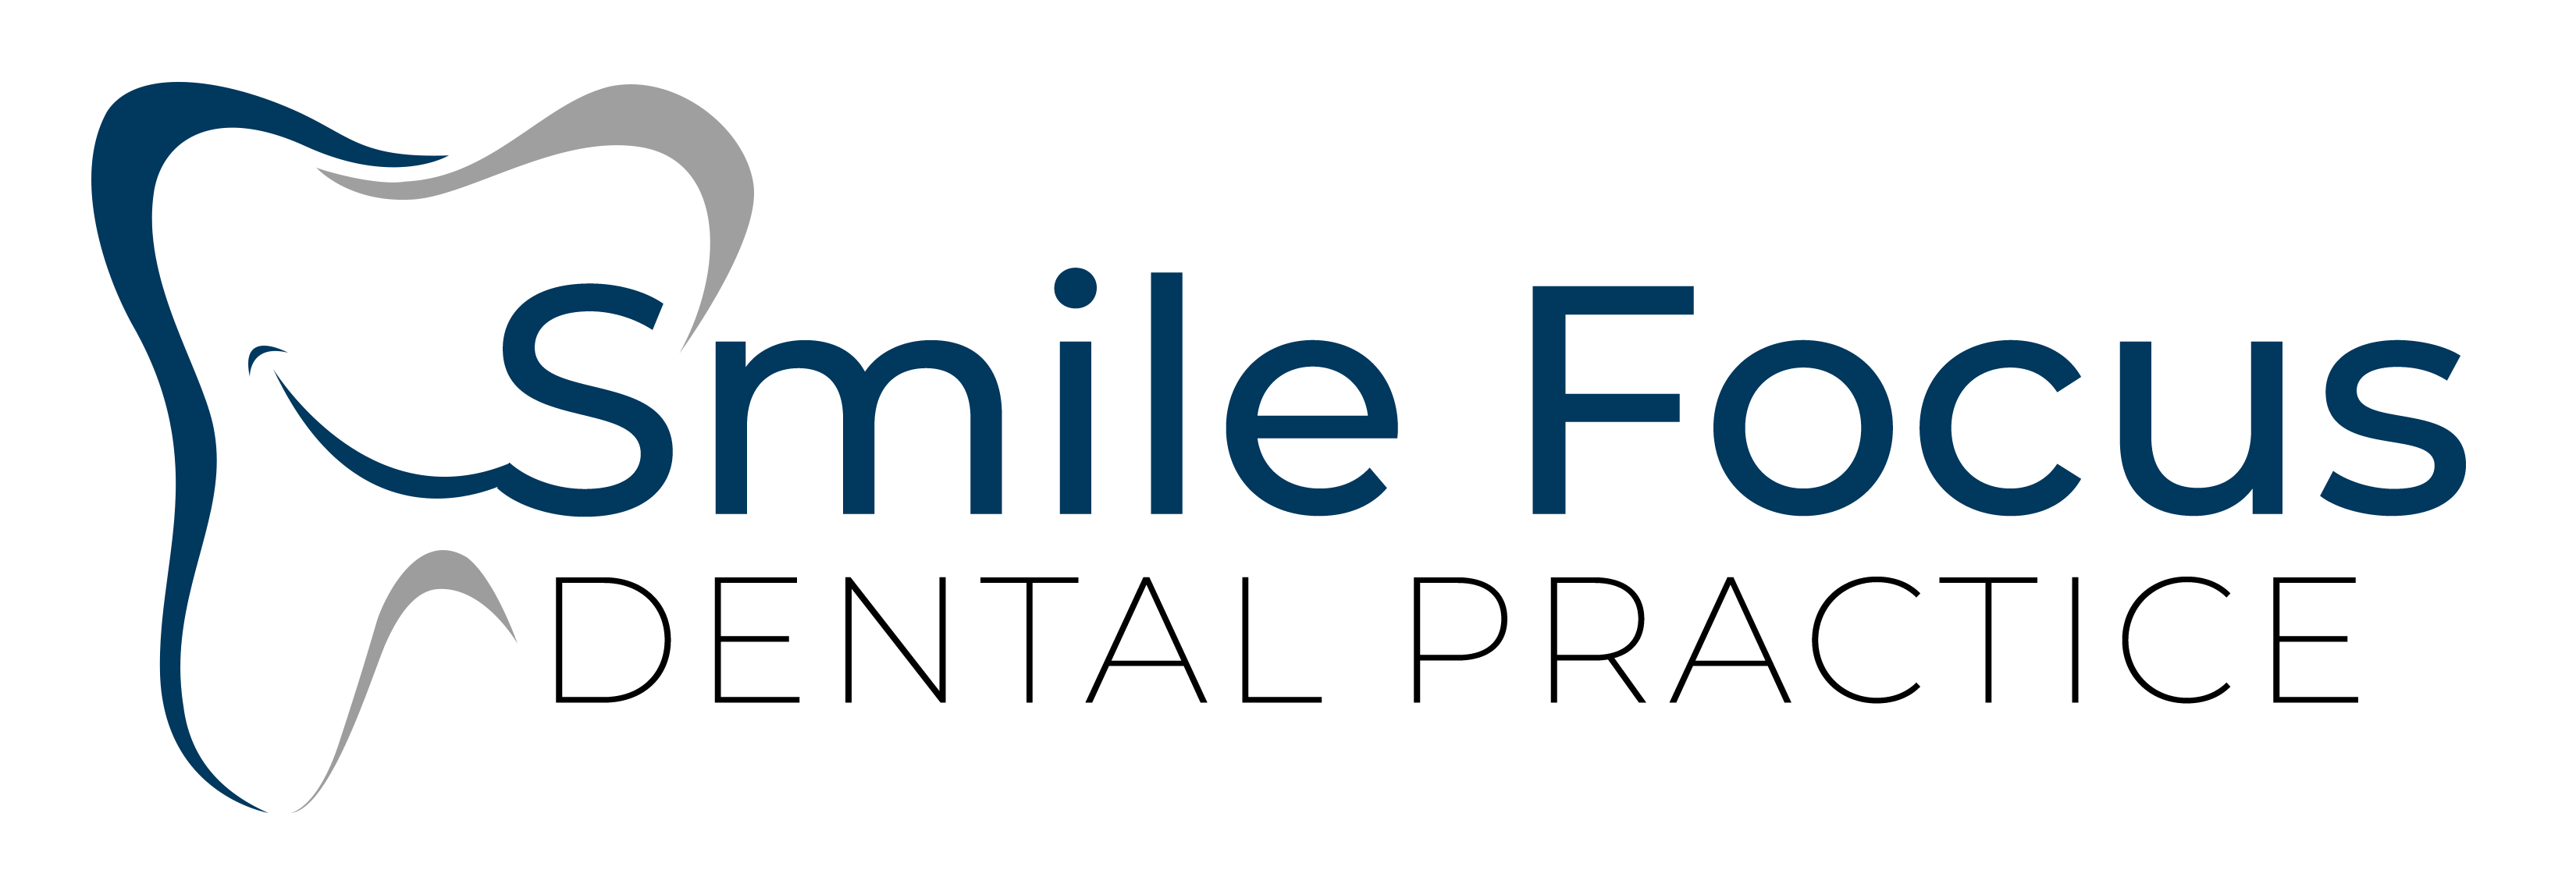 Smile Dental Logo by visual curve on Dribbble